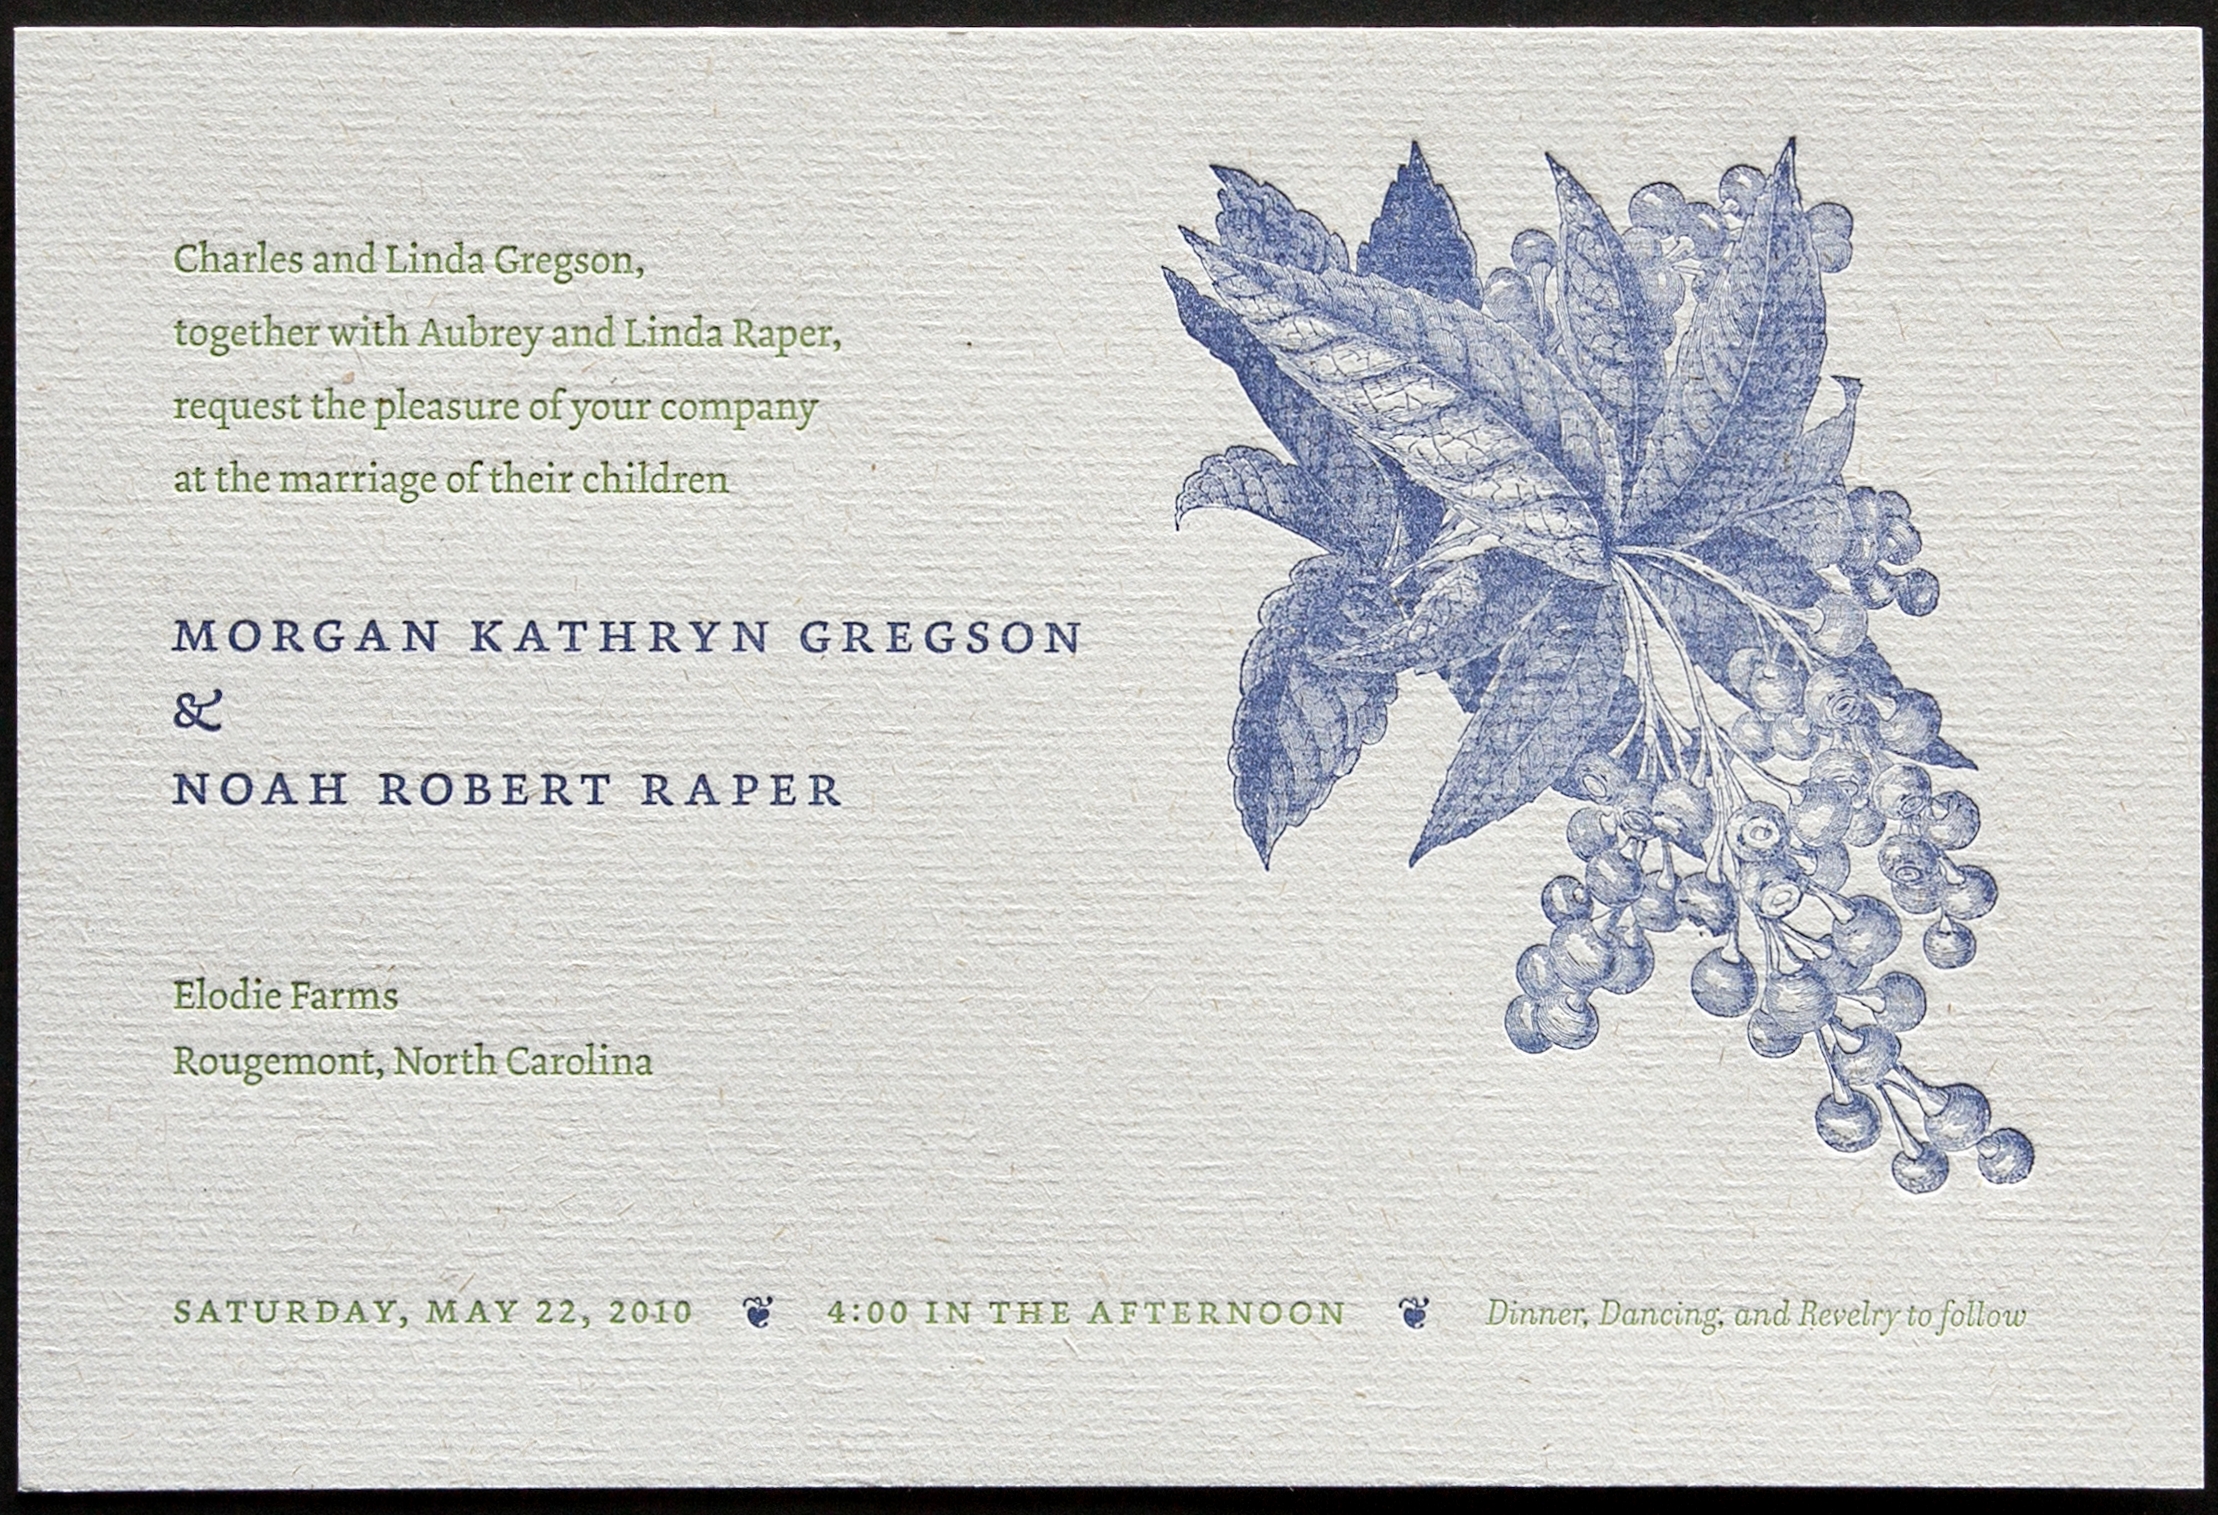  Wedding took place on a blueberry farm. Letterpress printing does a great job with line drawings.&nbsp; 